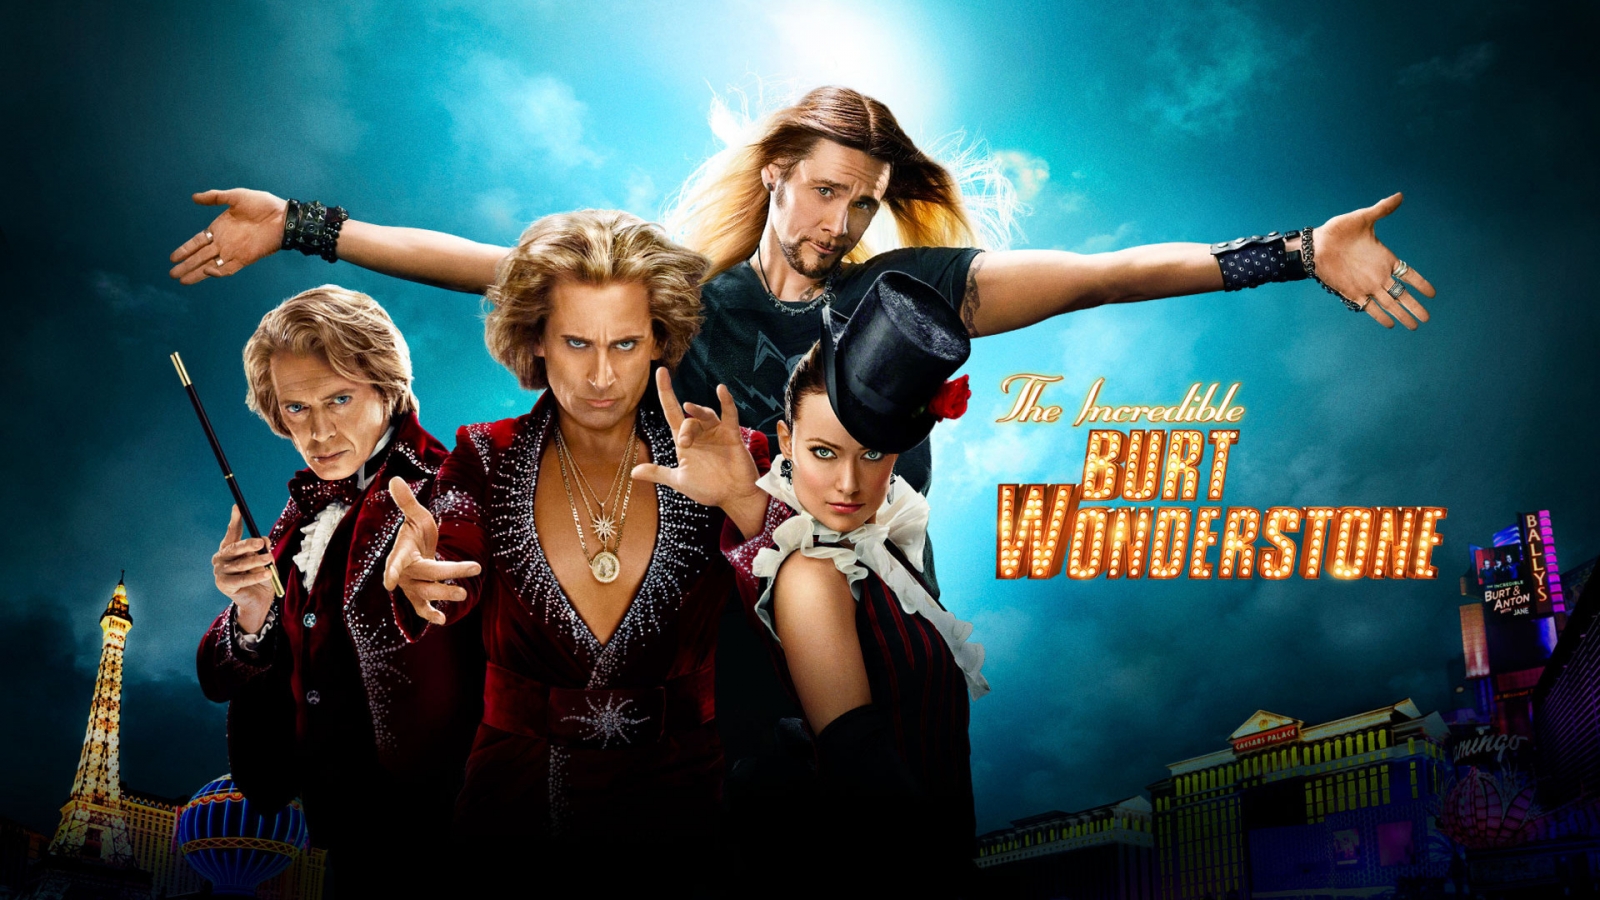 2013 The Incredible Burt Wonderstone Poster for 1600 x 900 HDTV resolution